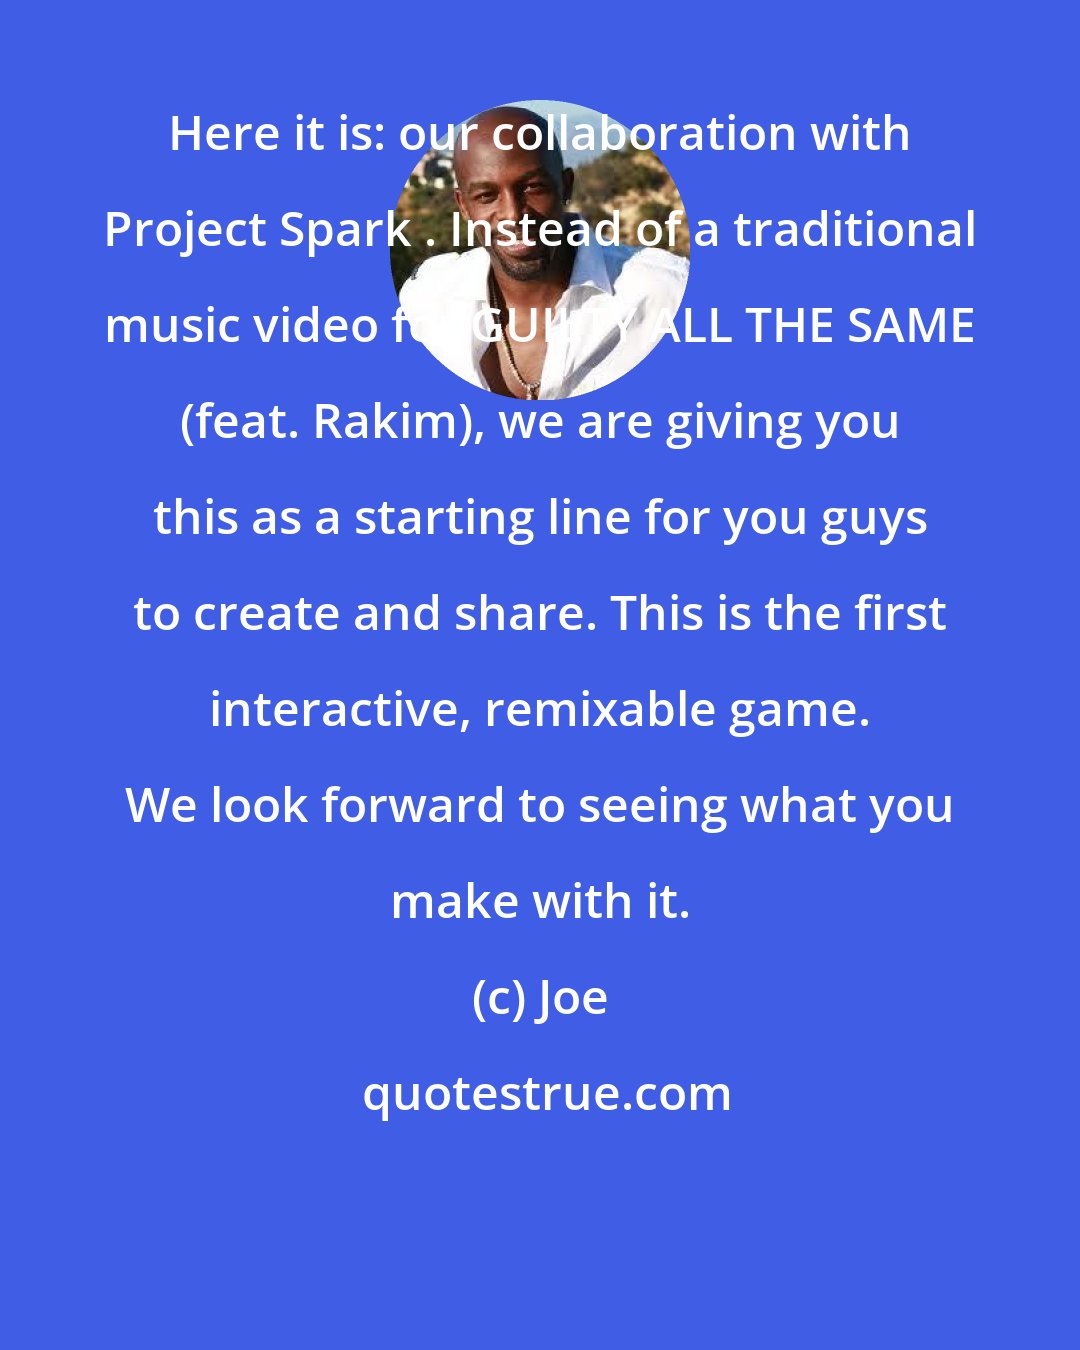 Joe: Here it is: our collaboration with Project Spark . Instead of a traditional music video for GUILTY ALL THE SAME (feat. Rakim), we are giving you this as a starting line for you guys to create and share. This is the first interactive, remixable game. We look forward to seeing what you make with it.